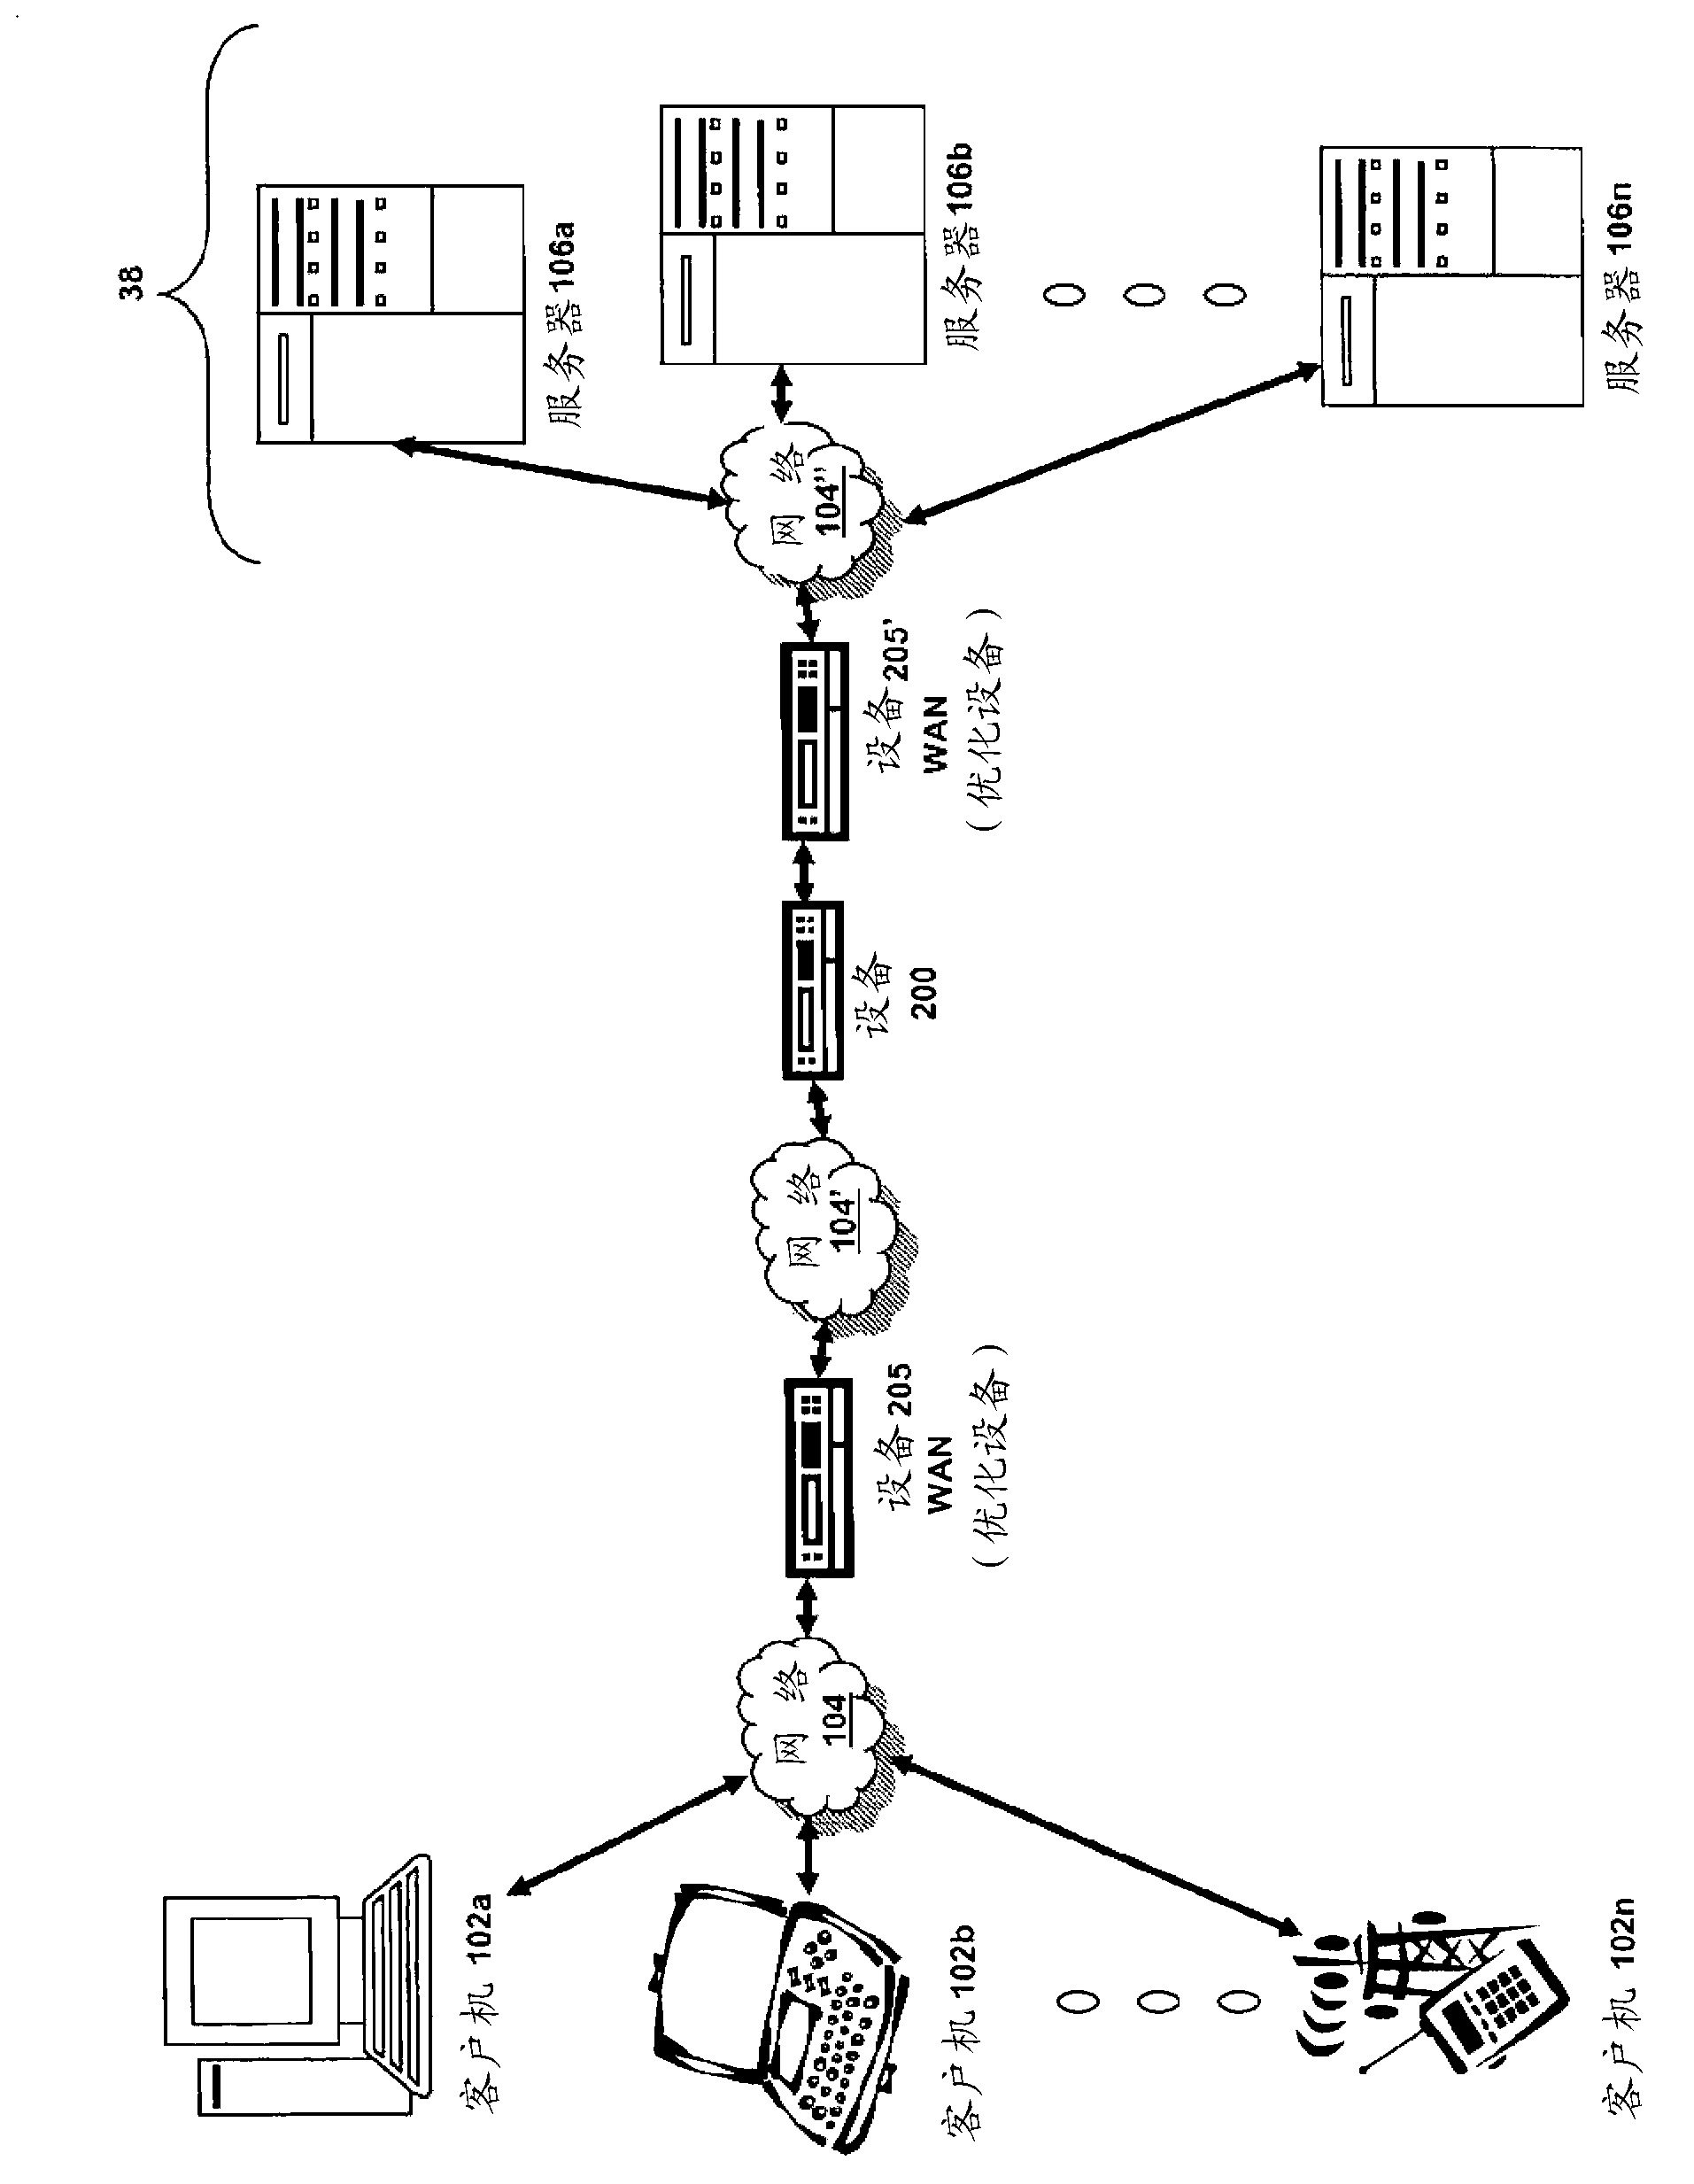 Systems and methods for an extensible authentication framework